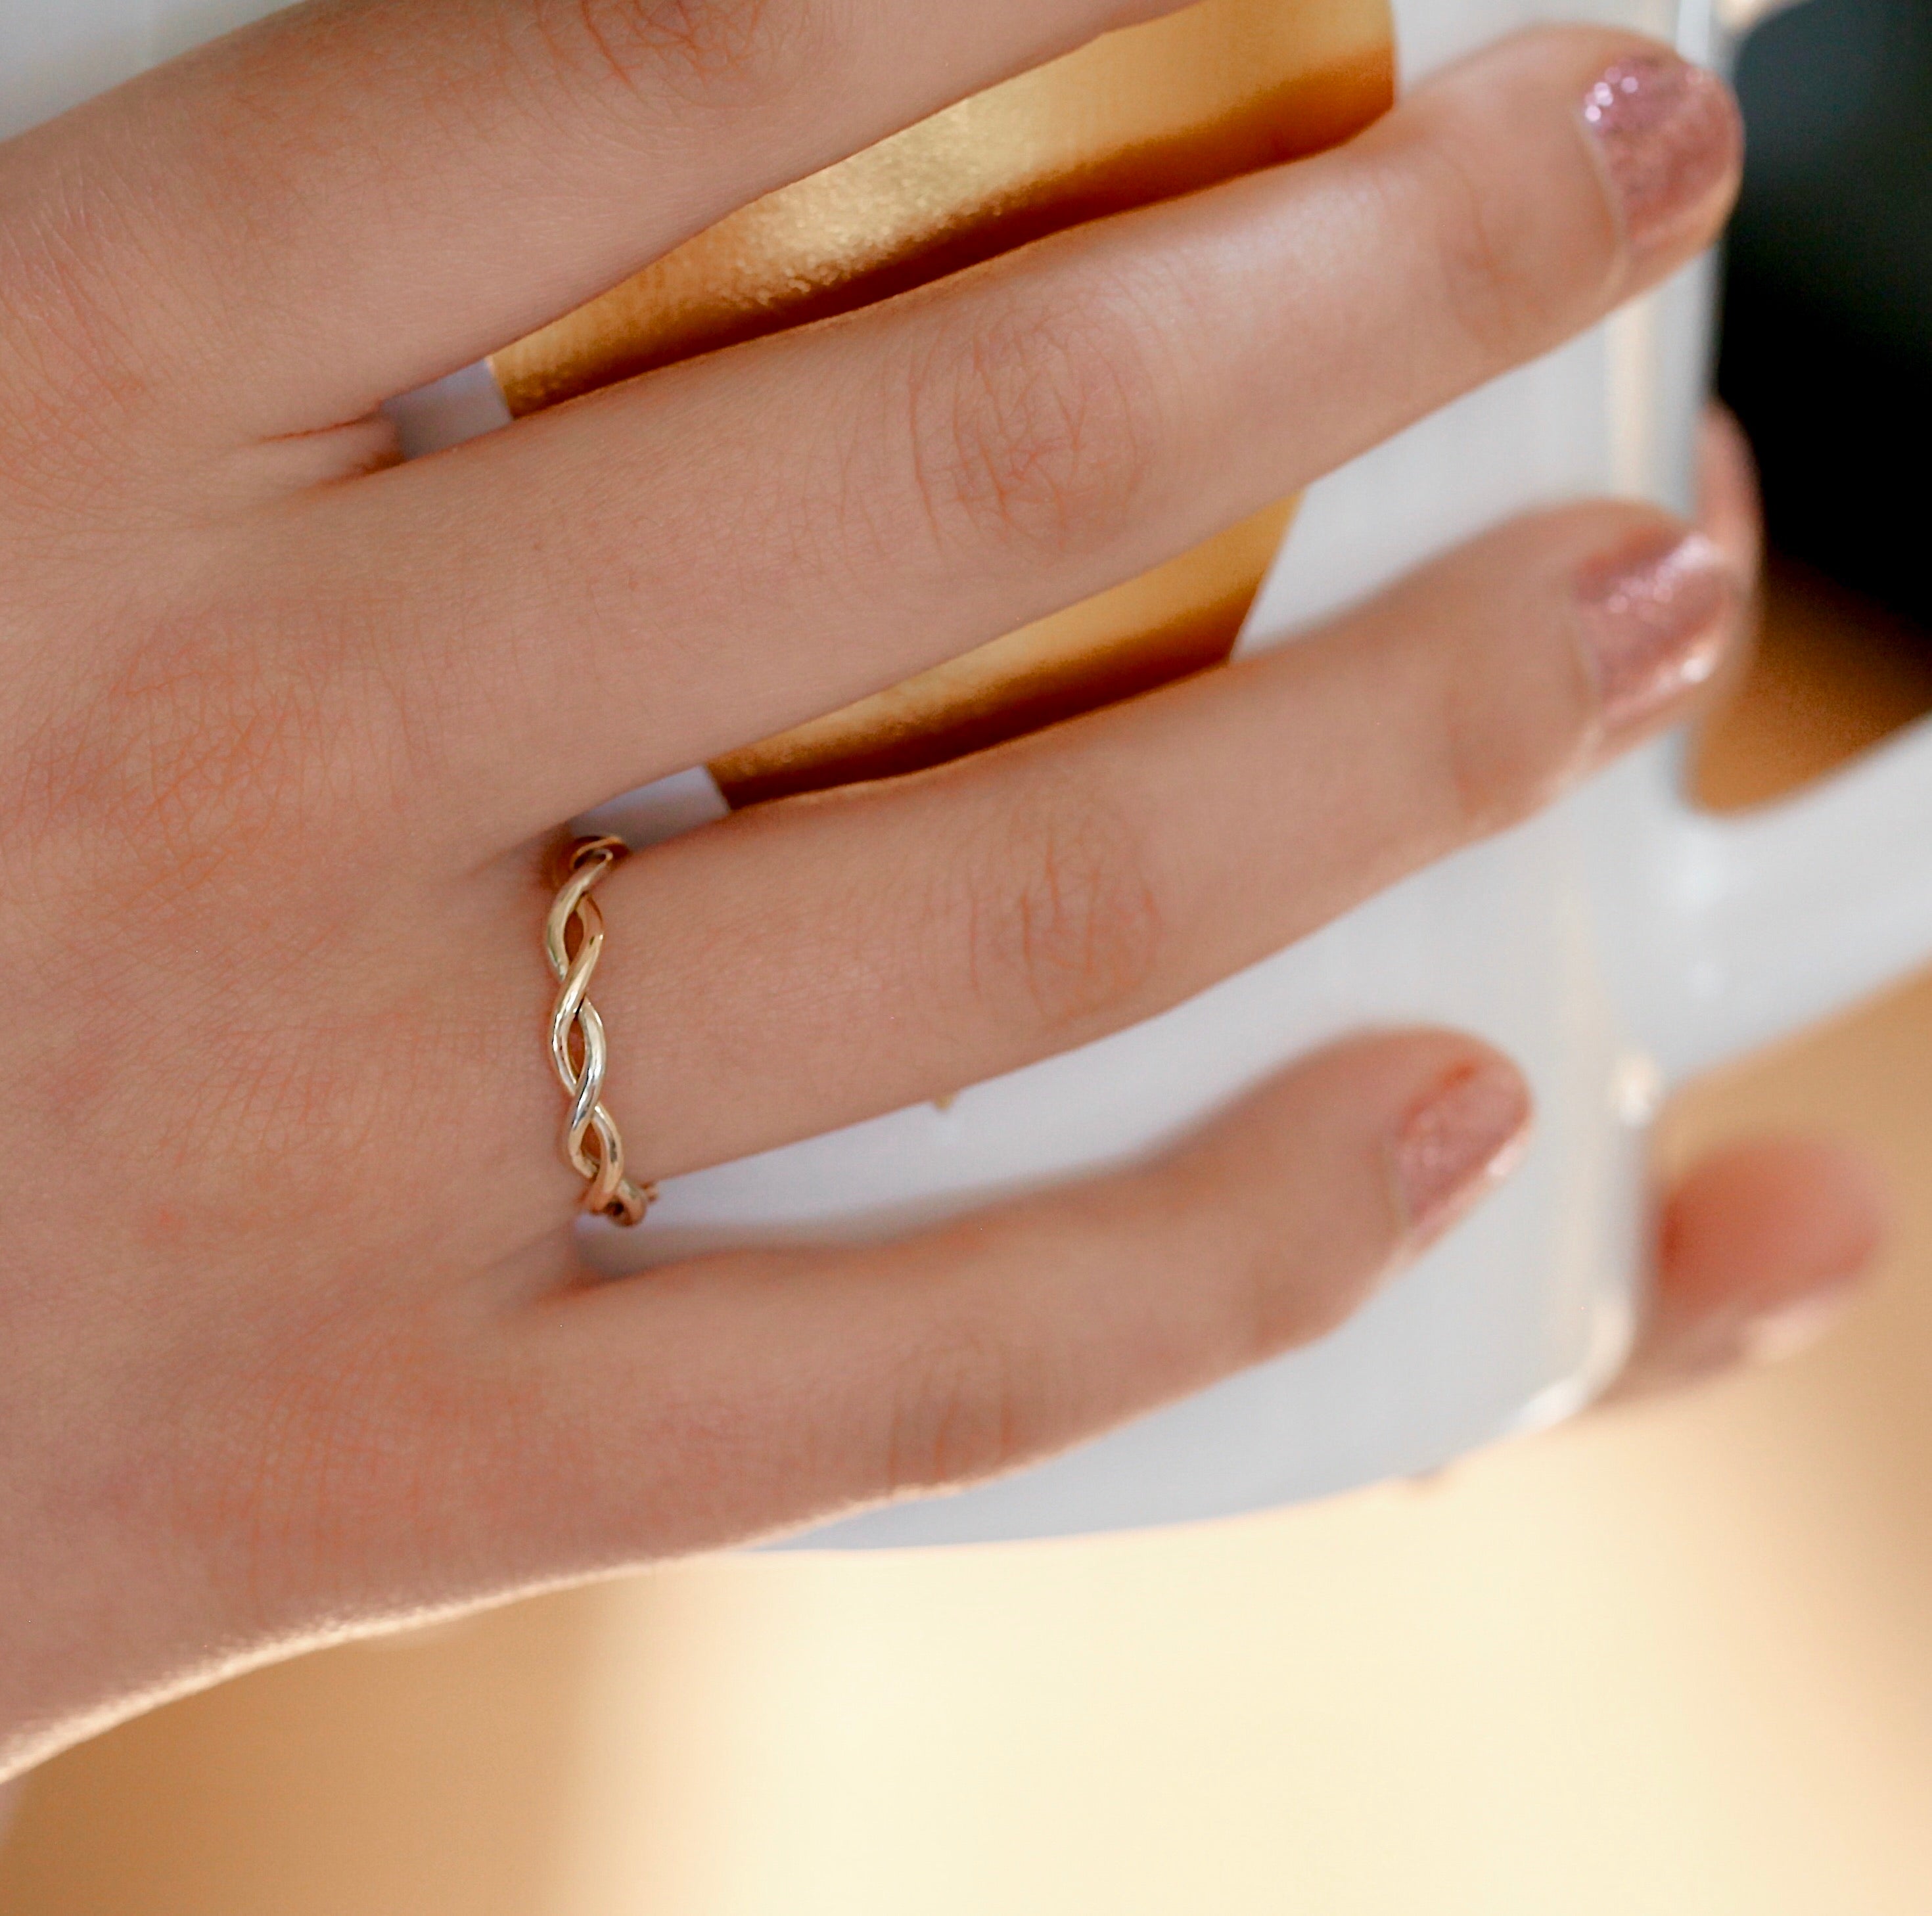 Twist Band Ring in White-Yellow 14k Gold